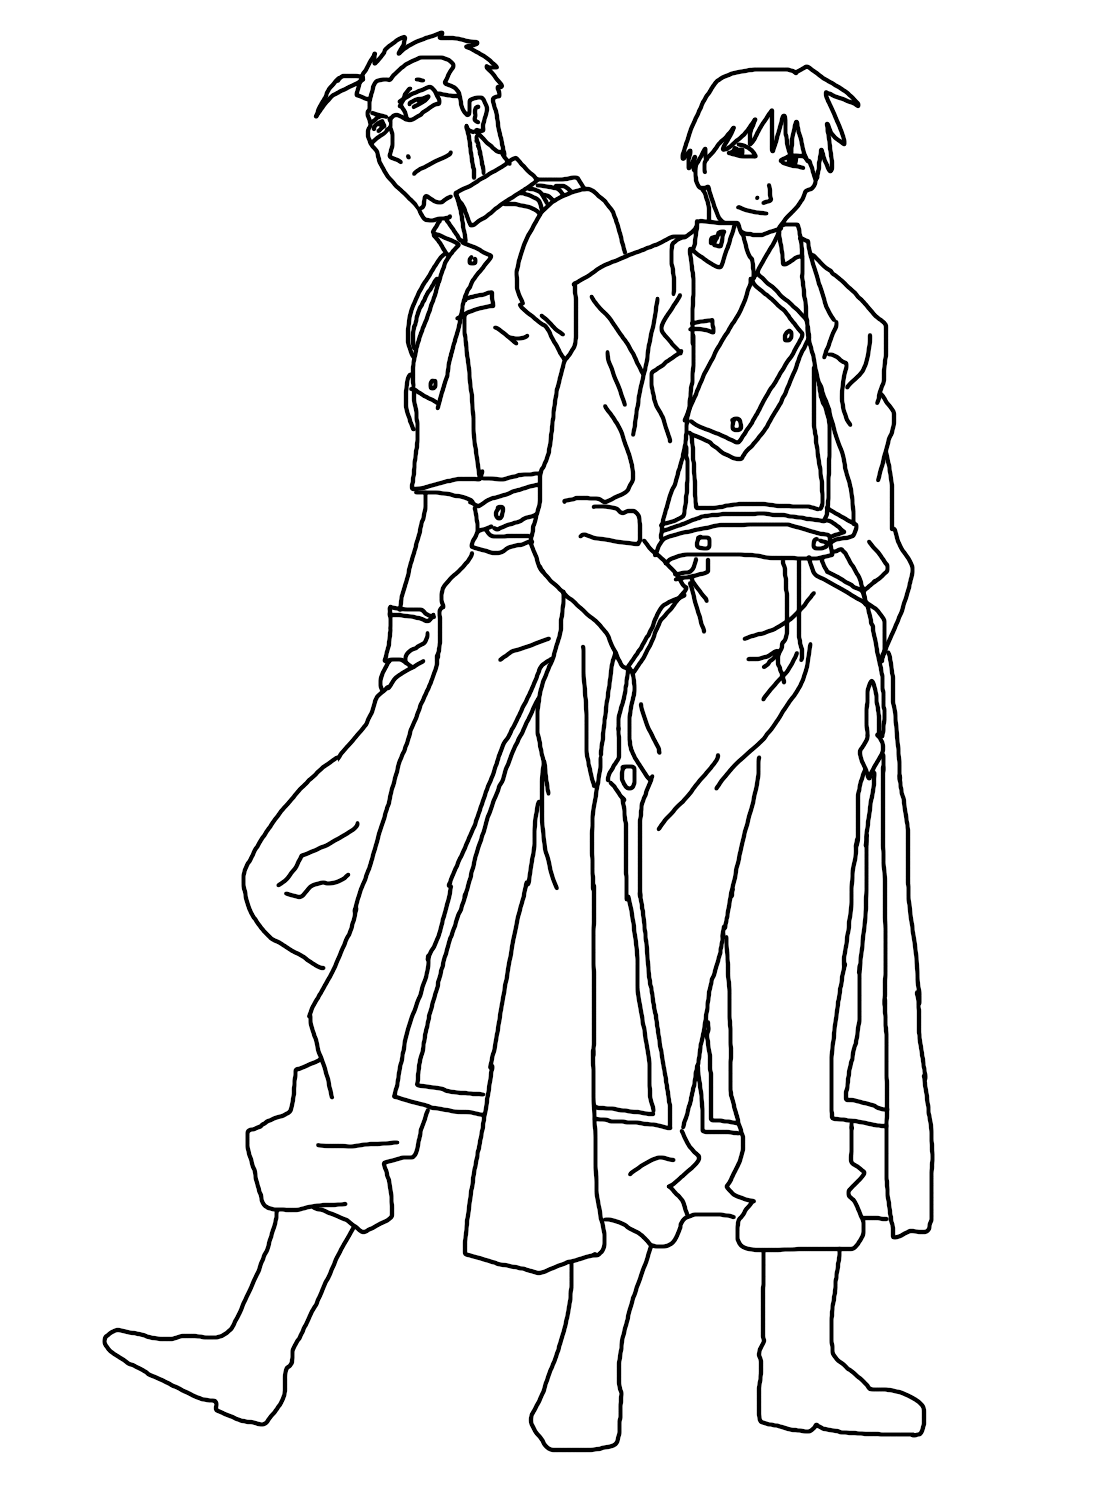 Maes Hughes and Roy Mustang Coloring Sheet - Free Printable Coloring Pages